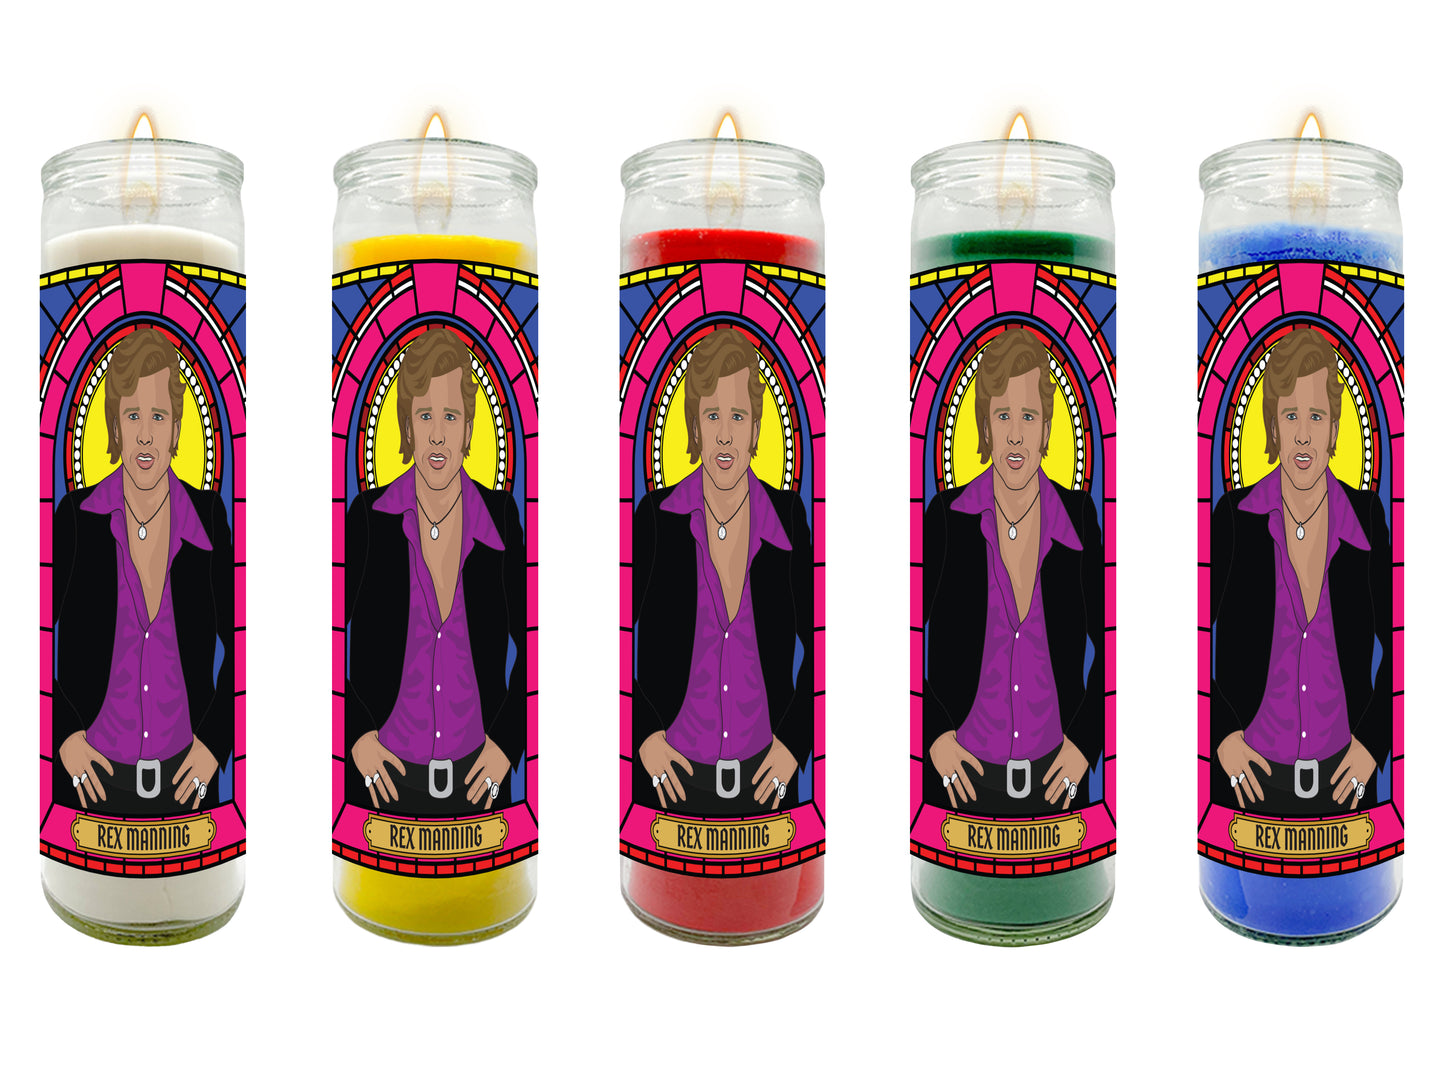 Rex Manning Empire Records Illustrated Prayer Candle